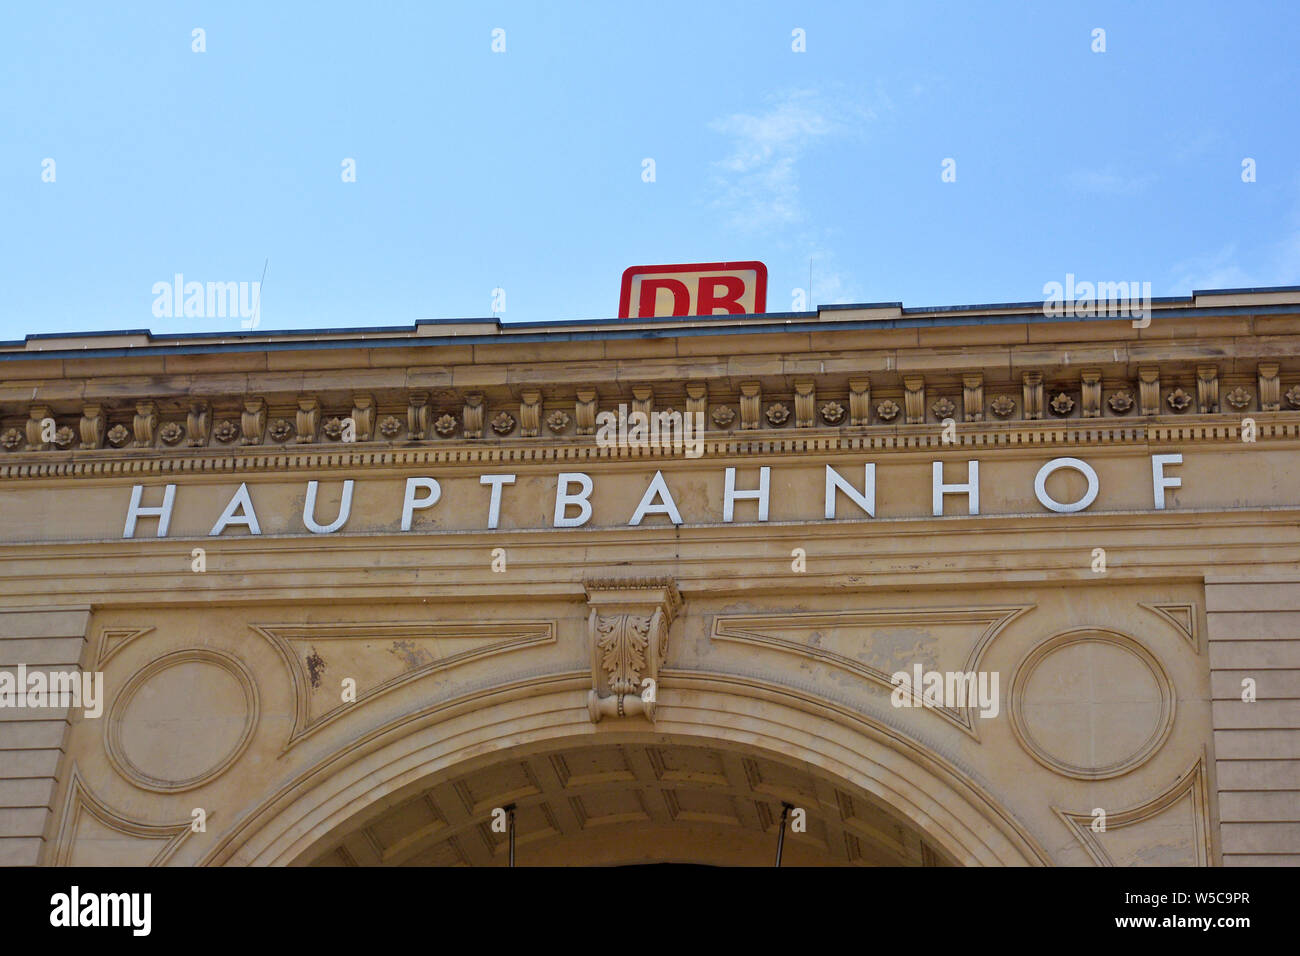 Mannheim, Germany - July 2019: Facade of German main station and 'Deutsche Bahn' train company logo above Stock Photo